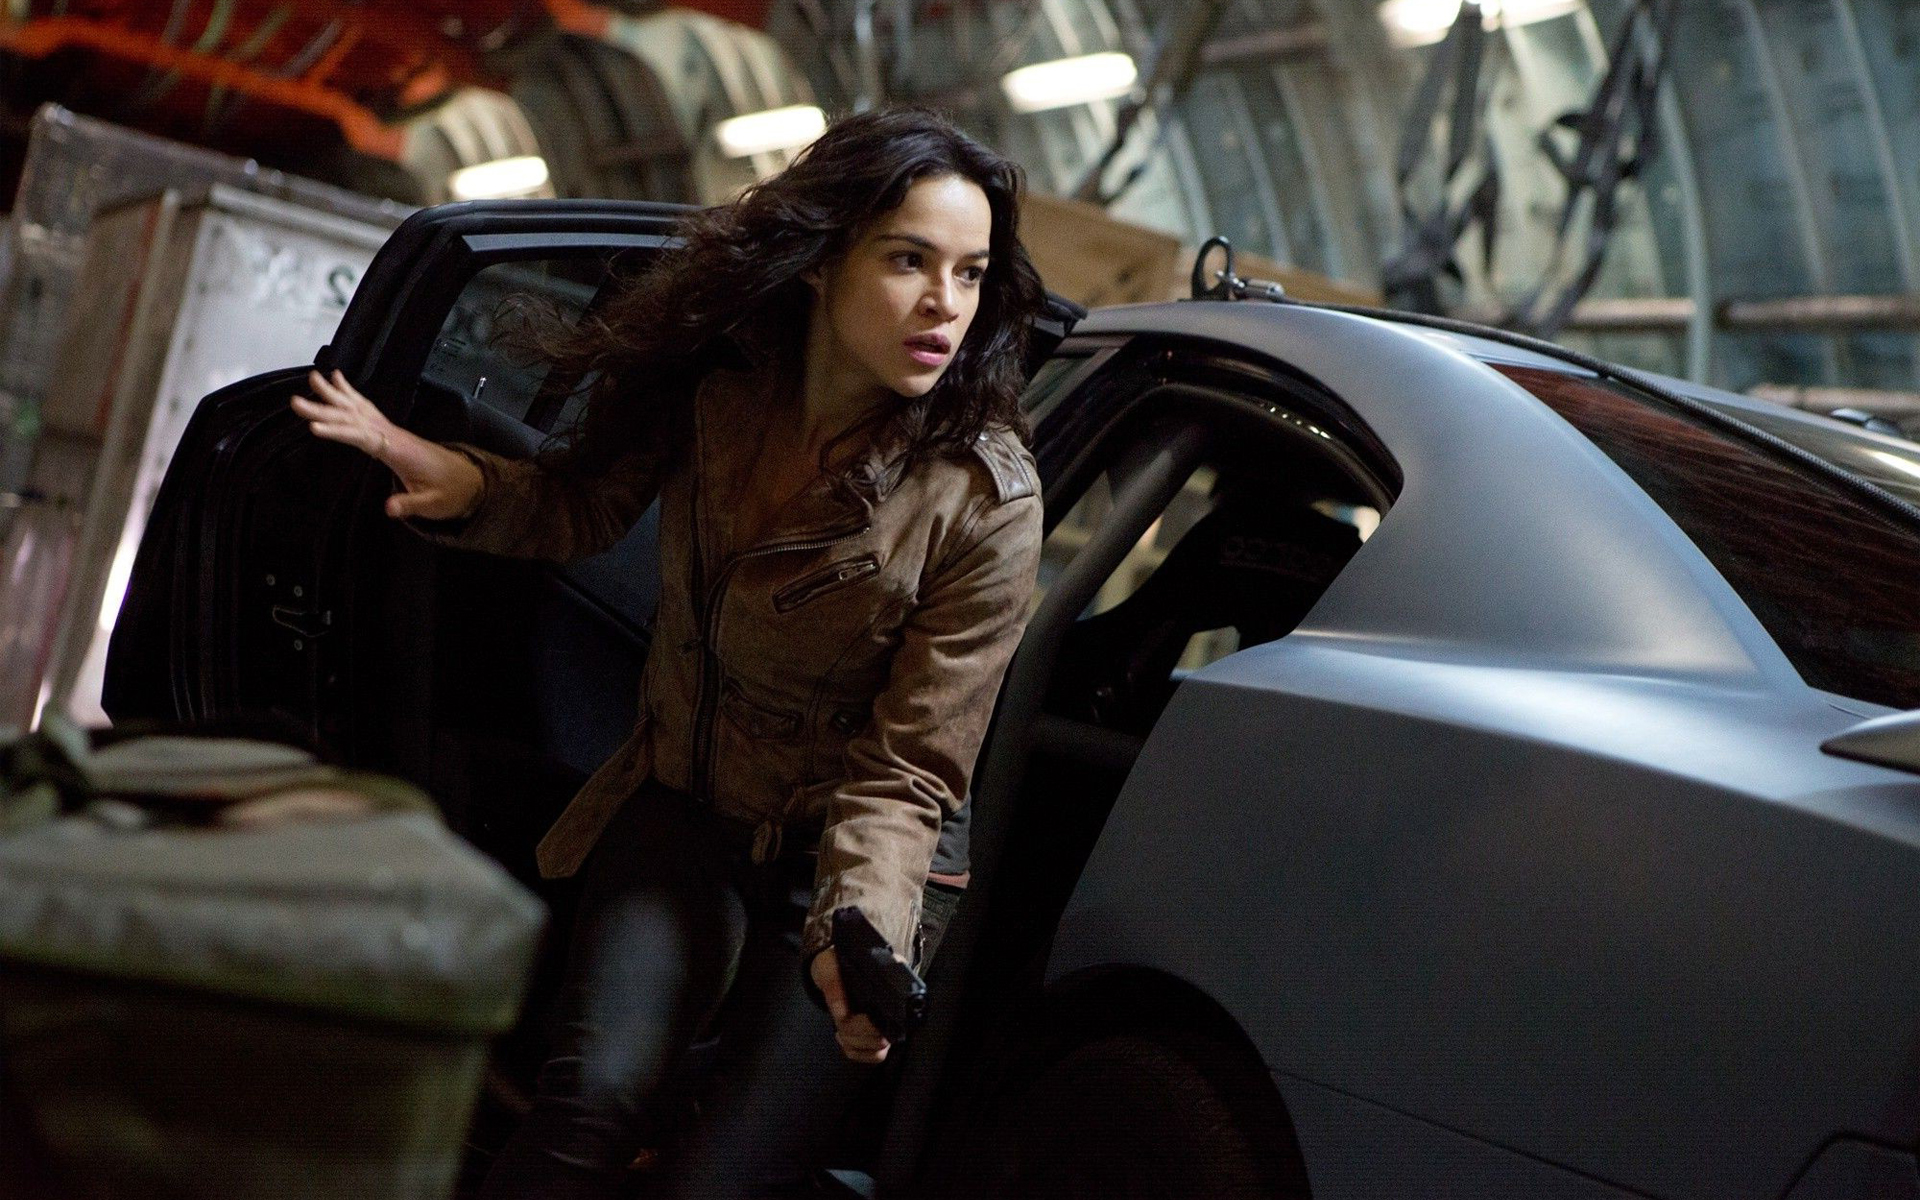 Ways the 'Fast and Furious' Franchise Can Be More Female